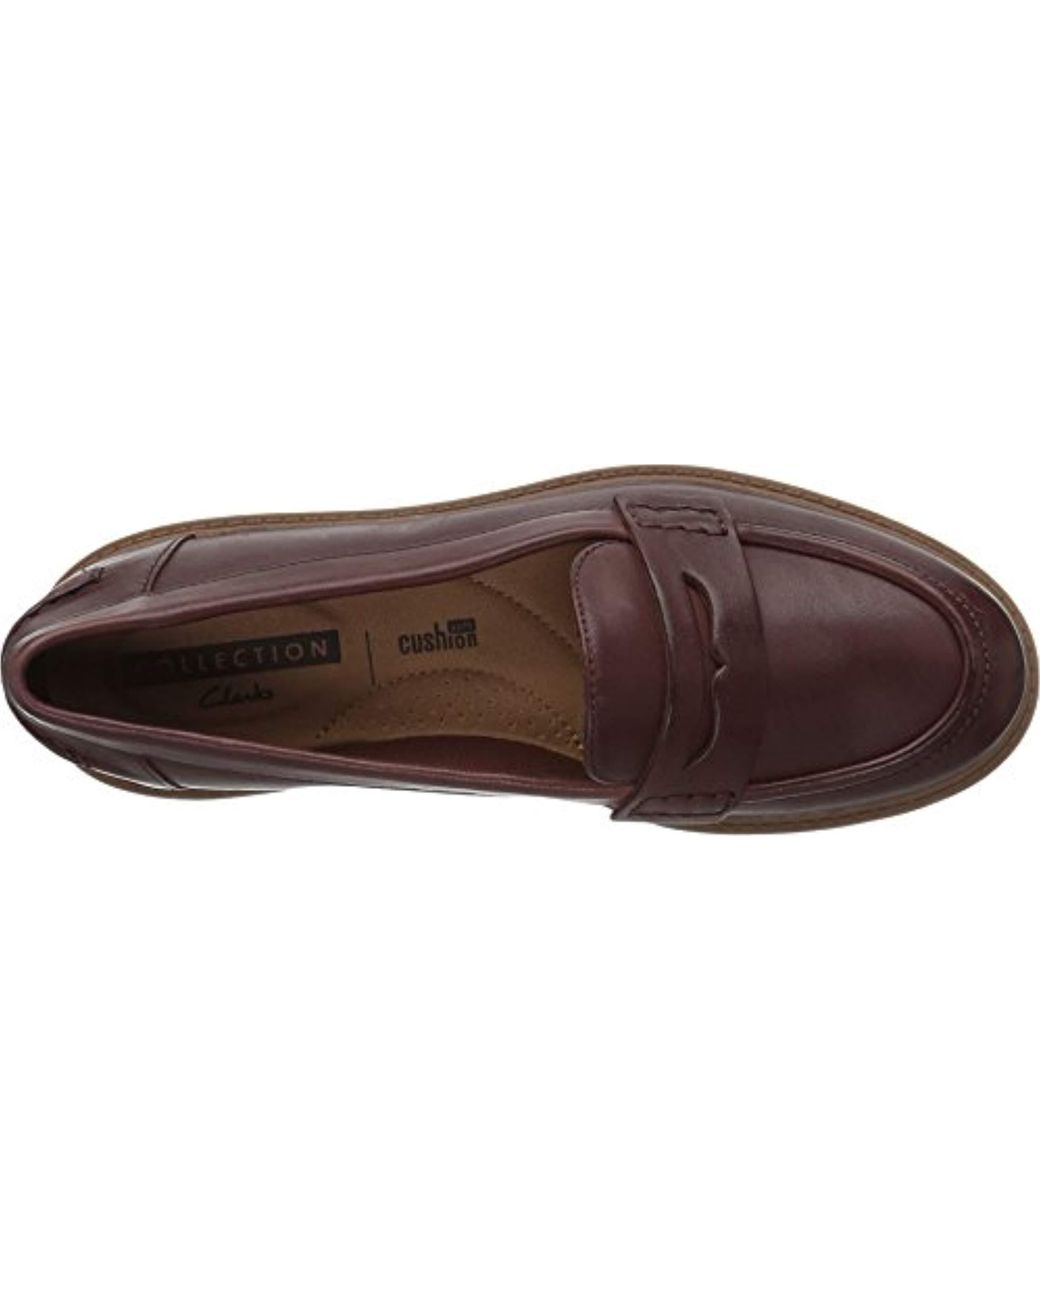 Clarks Leather Raisie Eletta Penny Loafer in Mahogany Leather (Brown) | Lyst